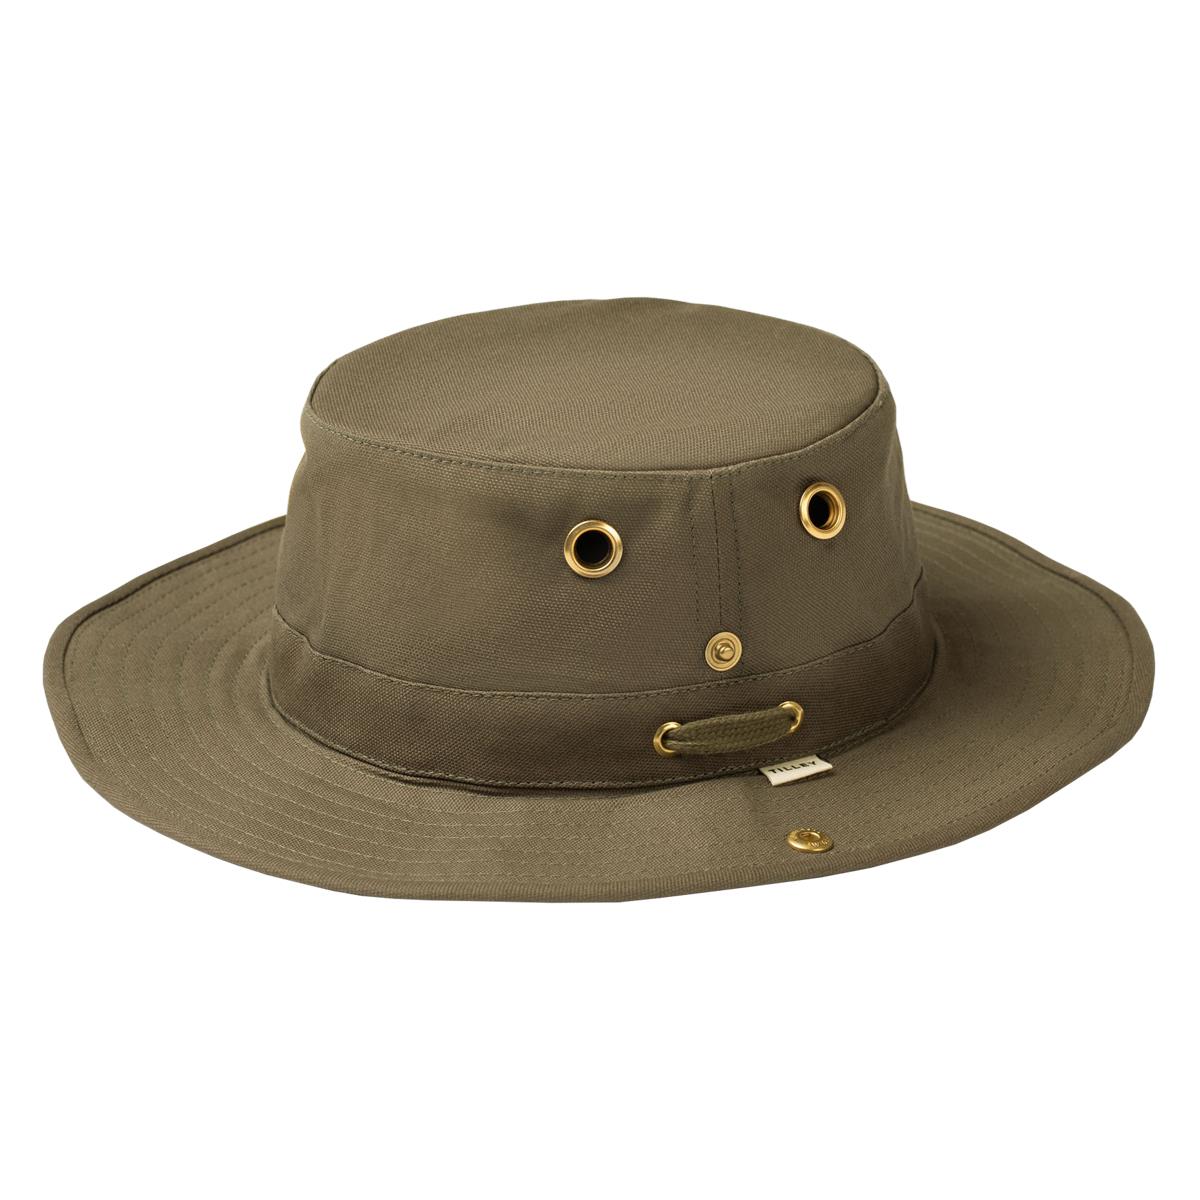 What advantages does the linen-like tilley hemp hat offer?